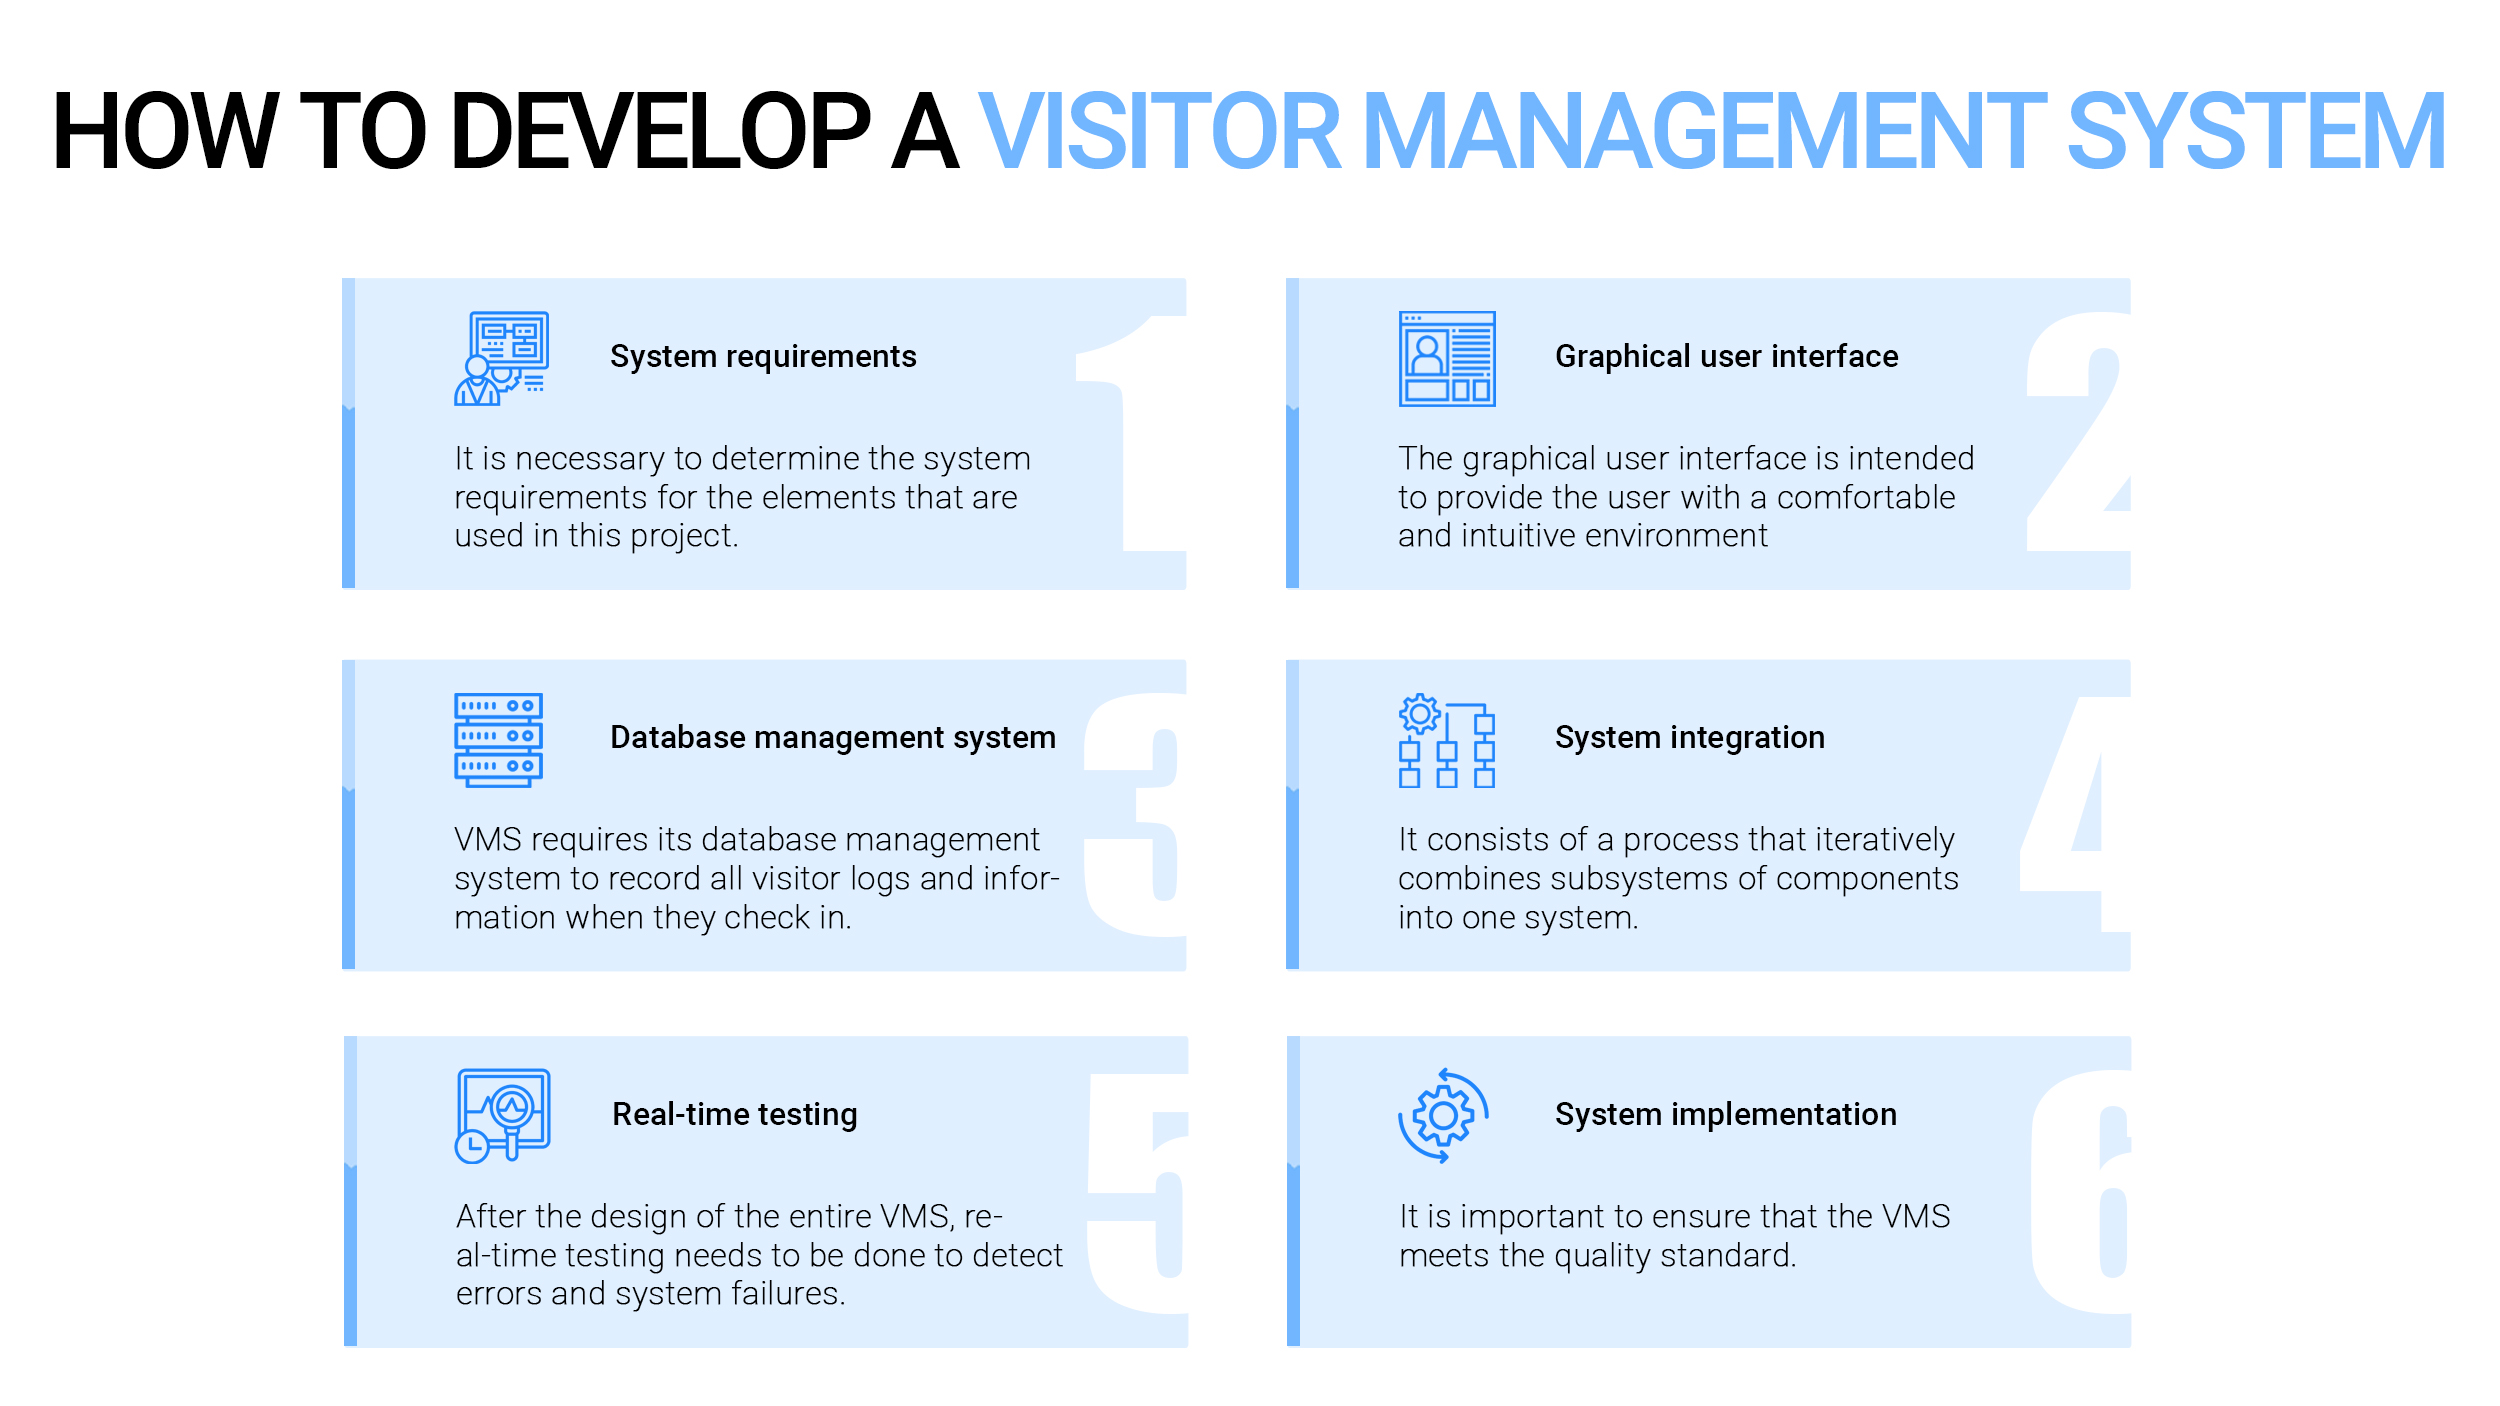 How to develop a visitor management system